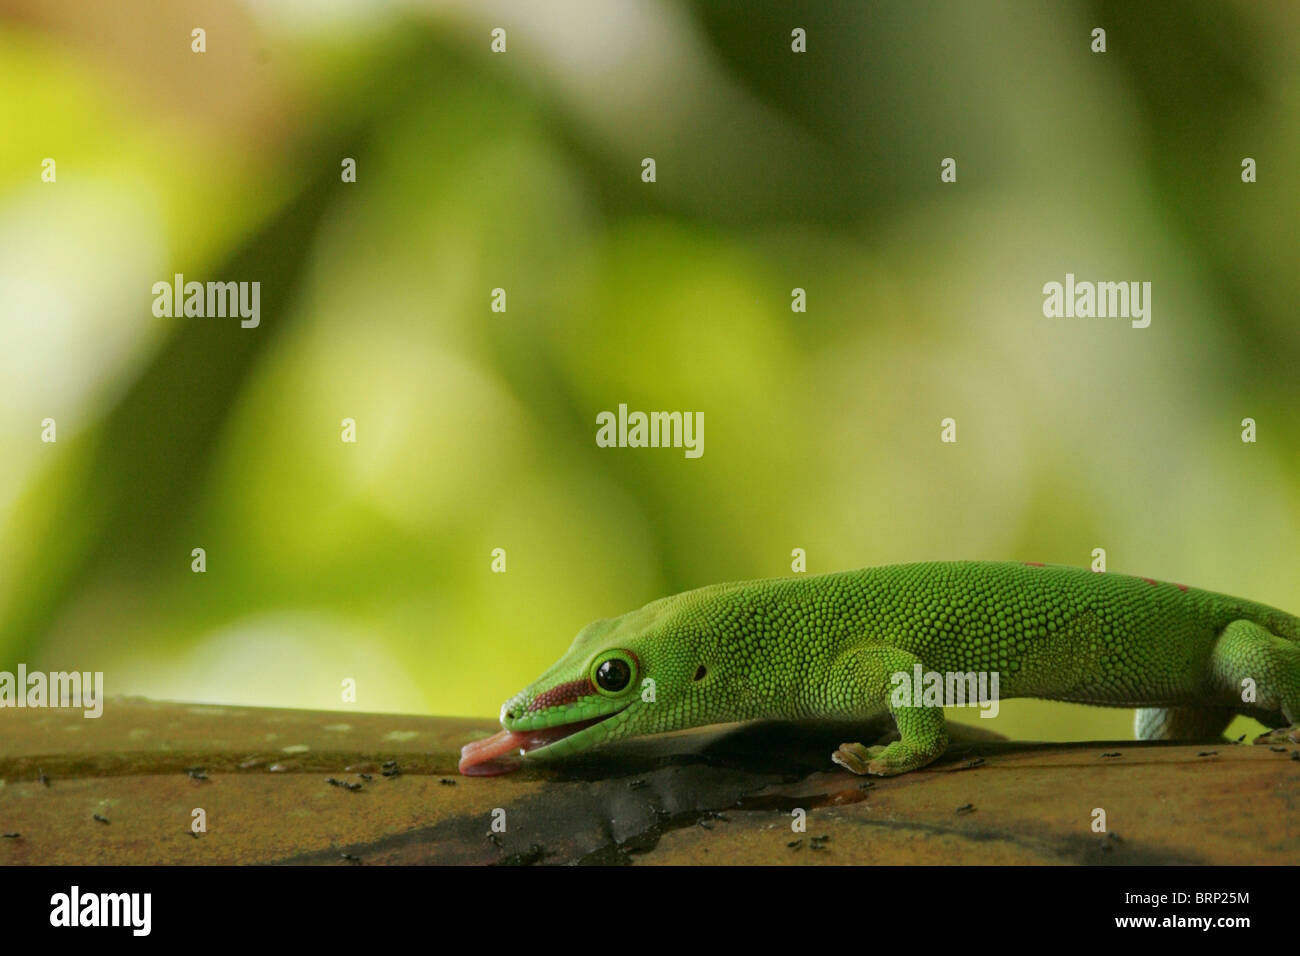 Madagascar Day Gecko with its tongue extended Stock Photo